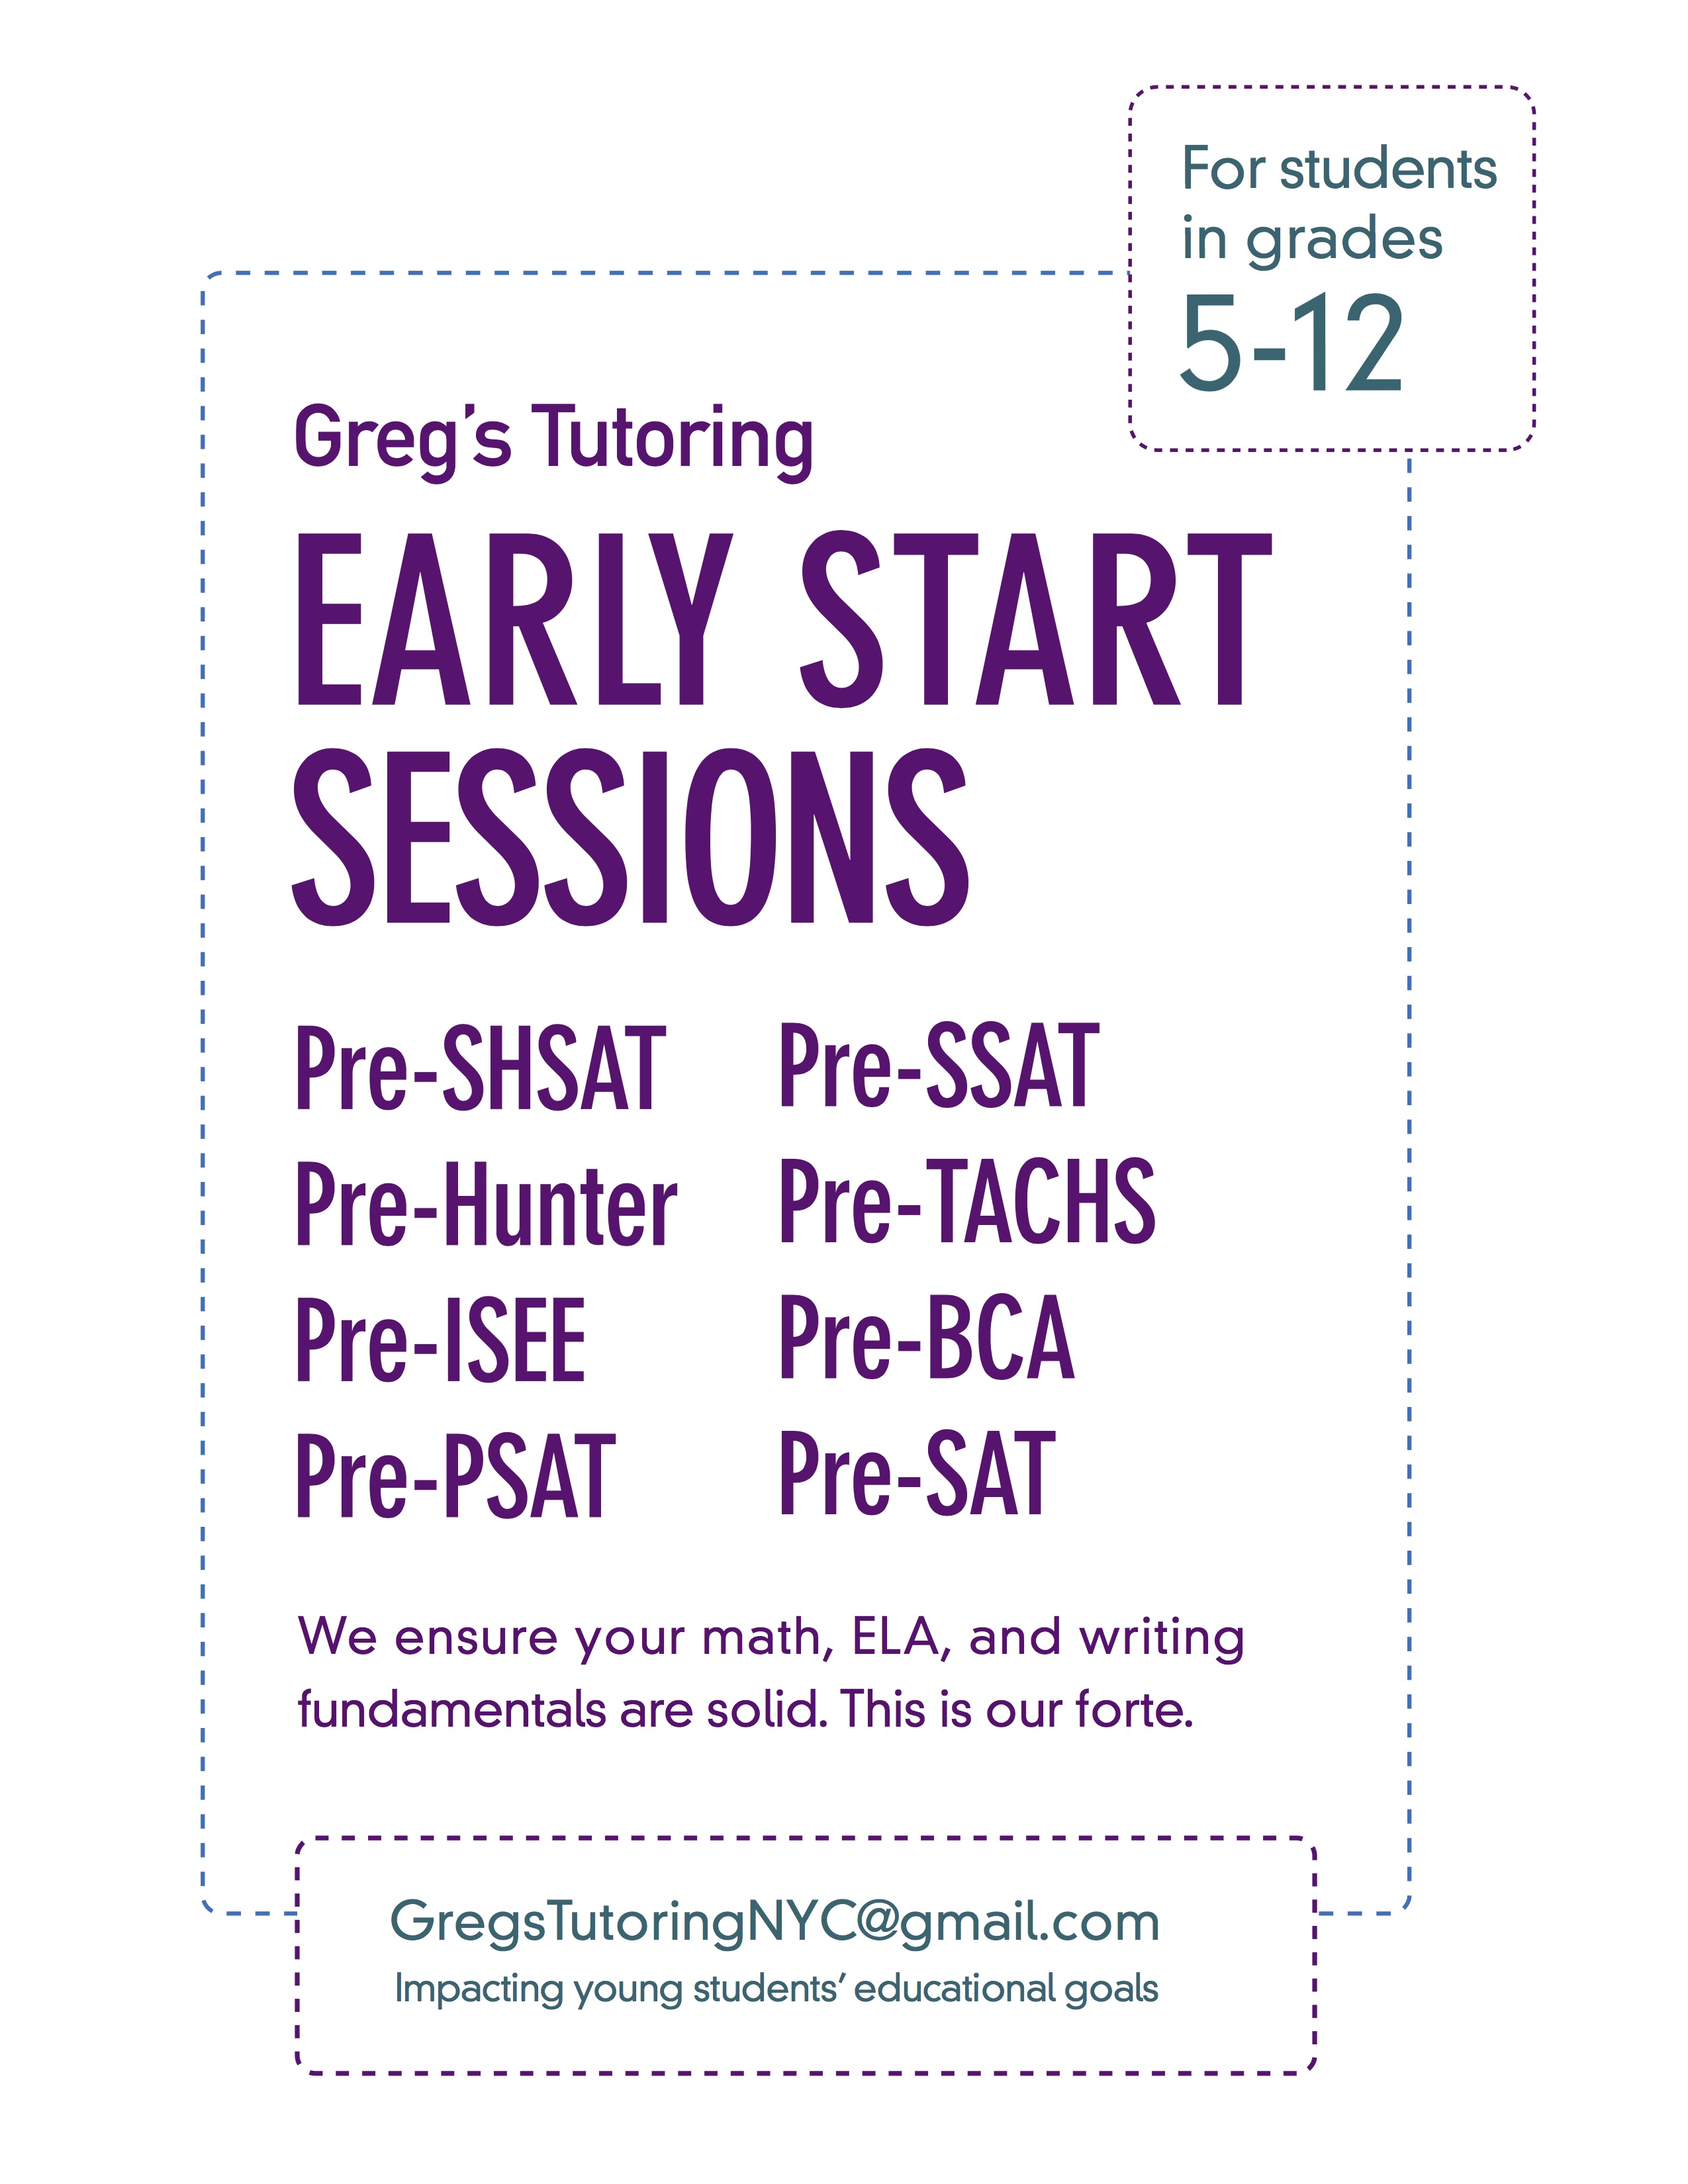 Early Start Tutoring Available Now